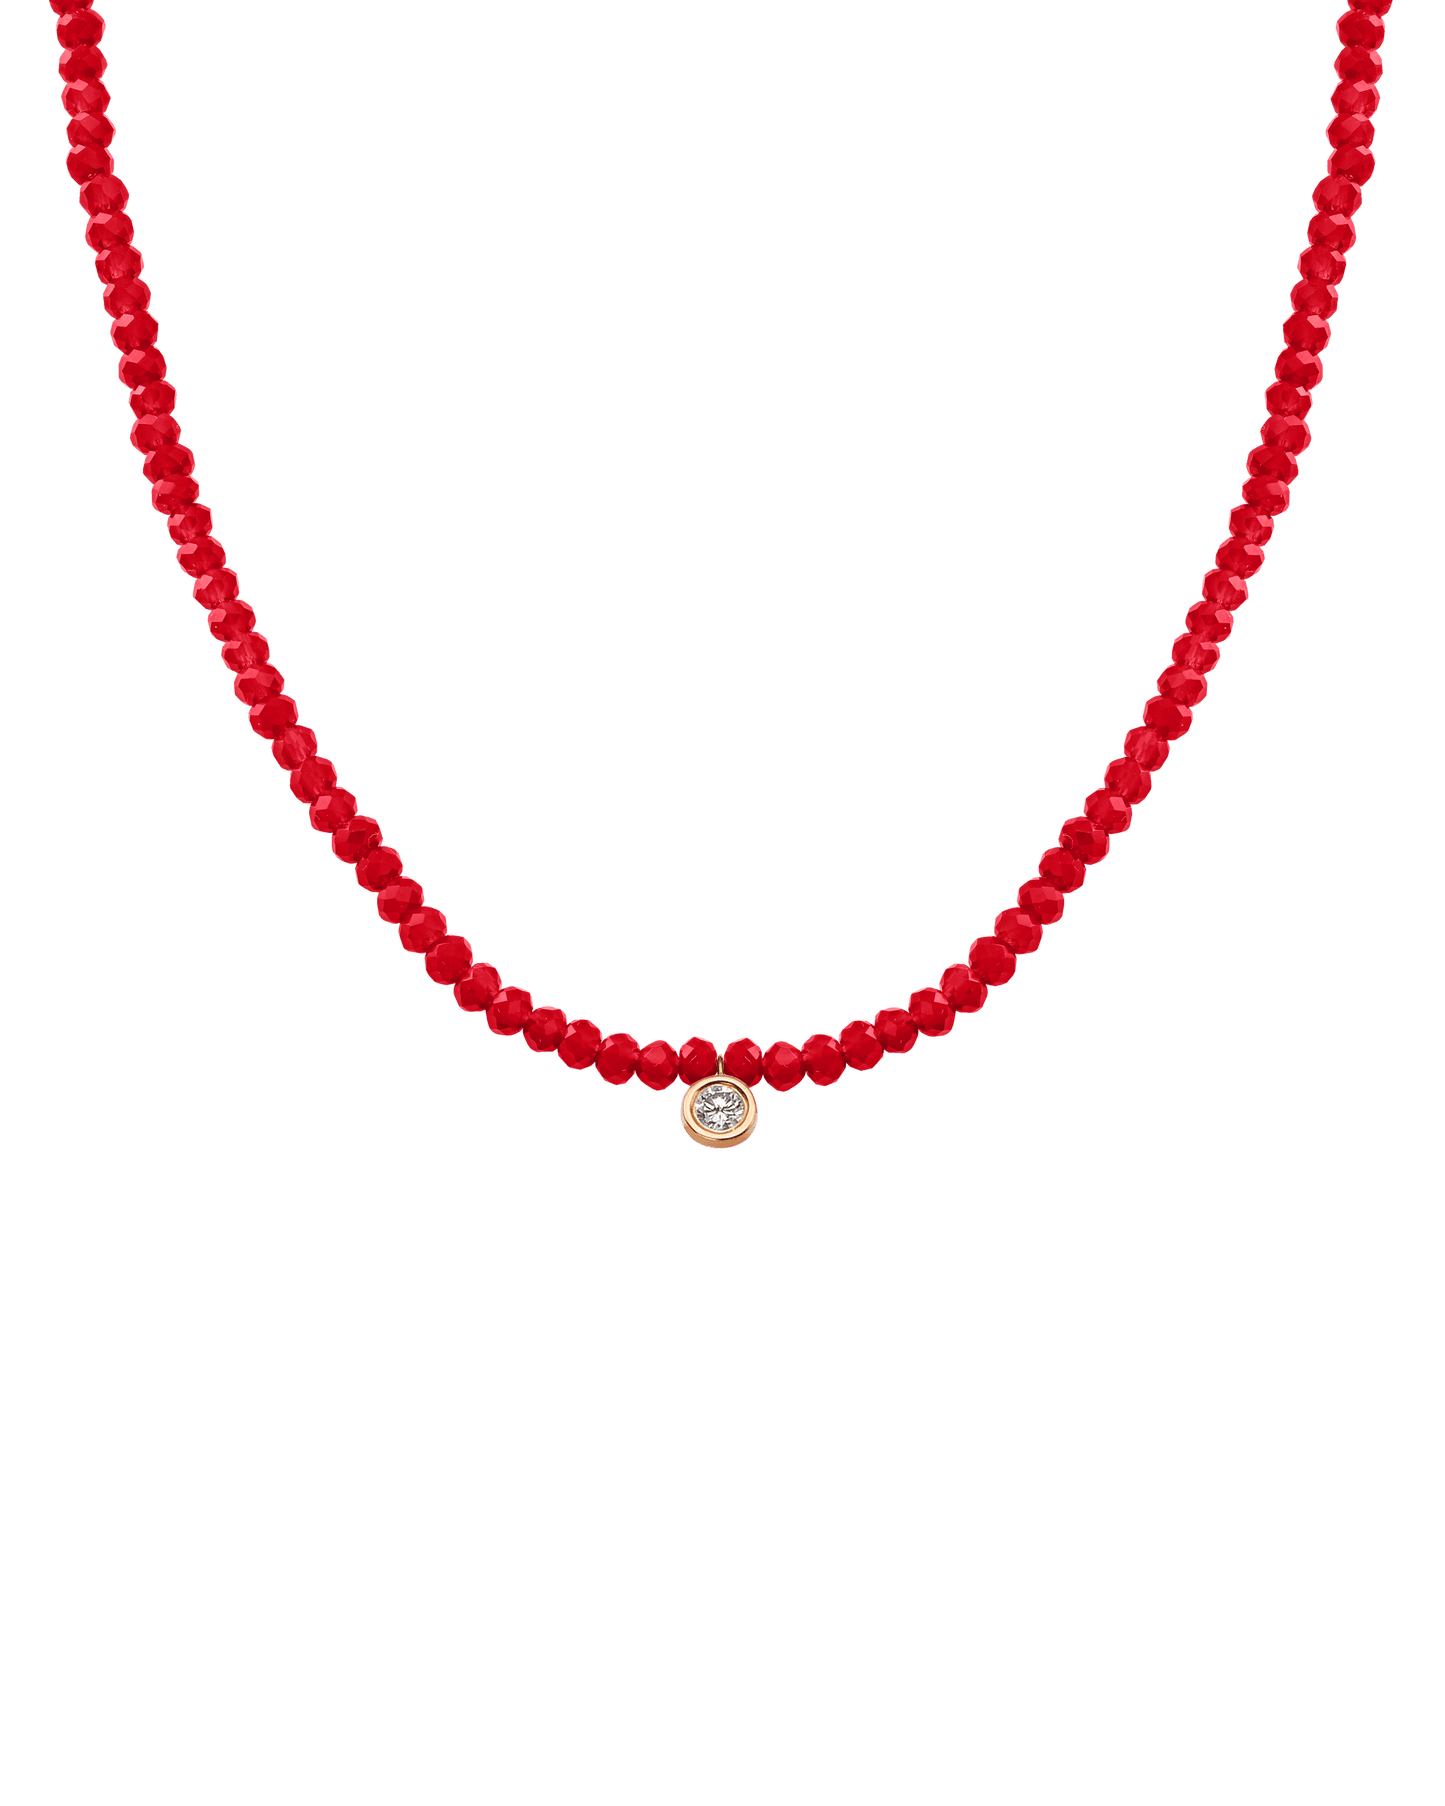 The Gemstone & Diamond Necklace - 14K Rose Gold Necklaces 14K Solid Gold Natural Red Jade Large: 0.1ct 14"